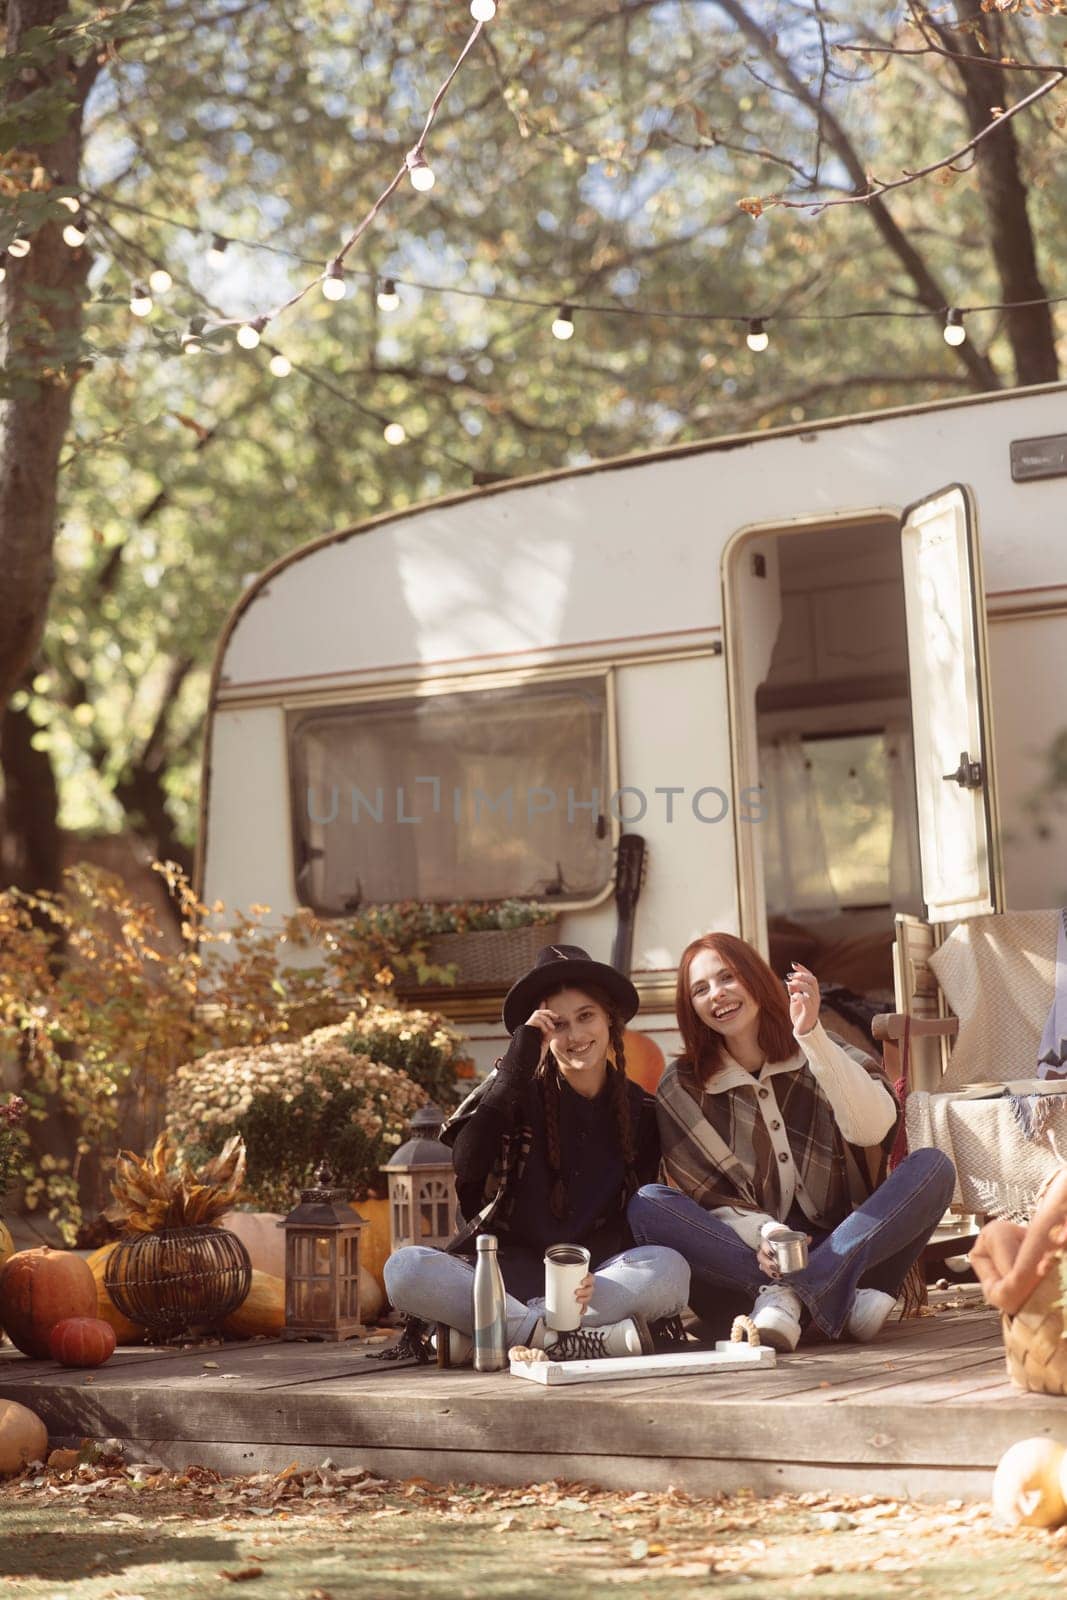 A pair of trendy gals don boho-chic attire against the trailer backdrop. High quality photo